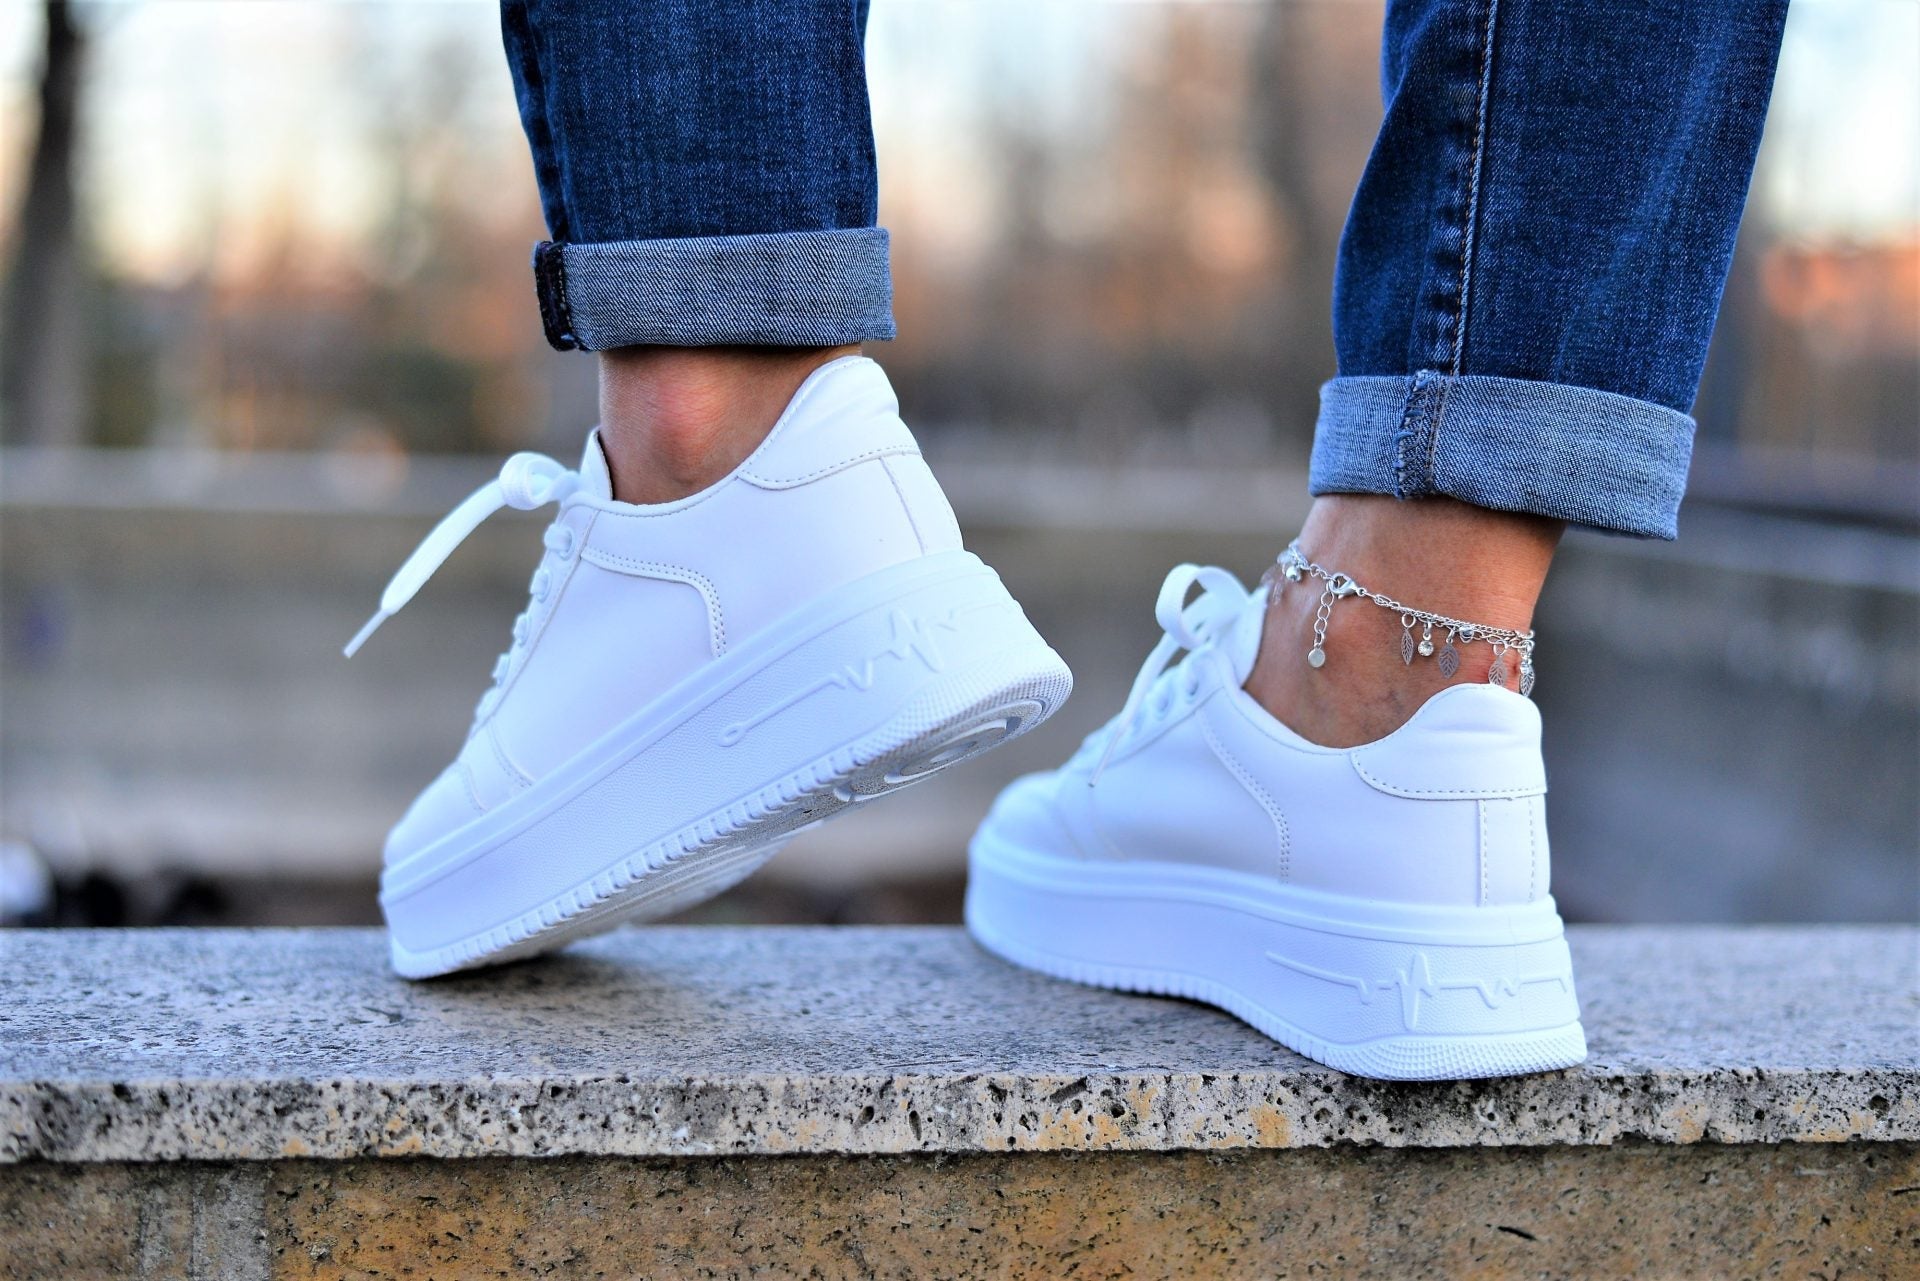 Women's White Elisa Sneakers Made of Ecological Leather